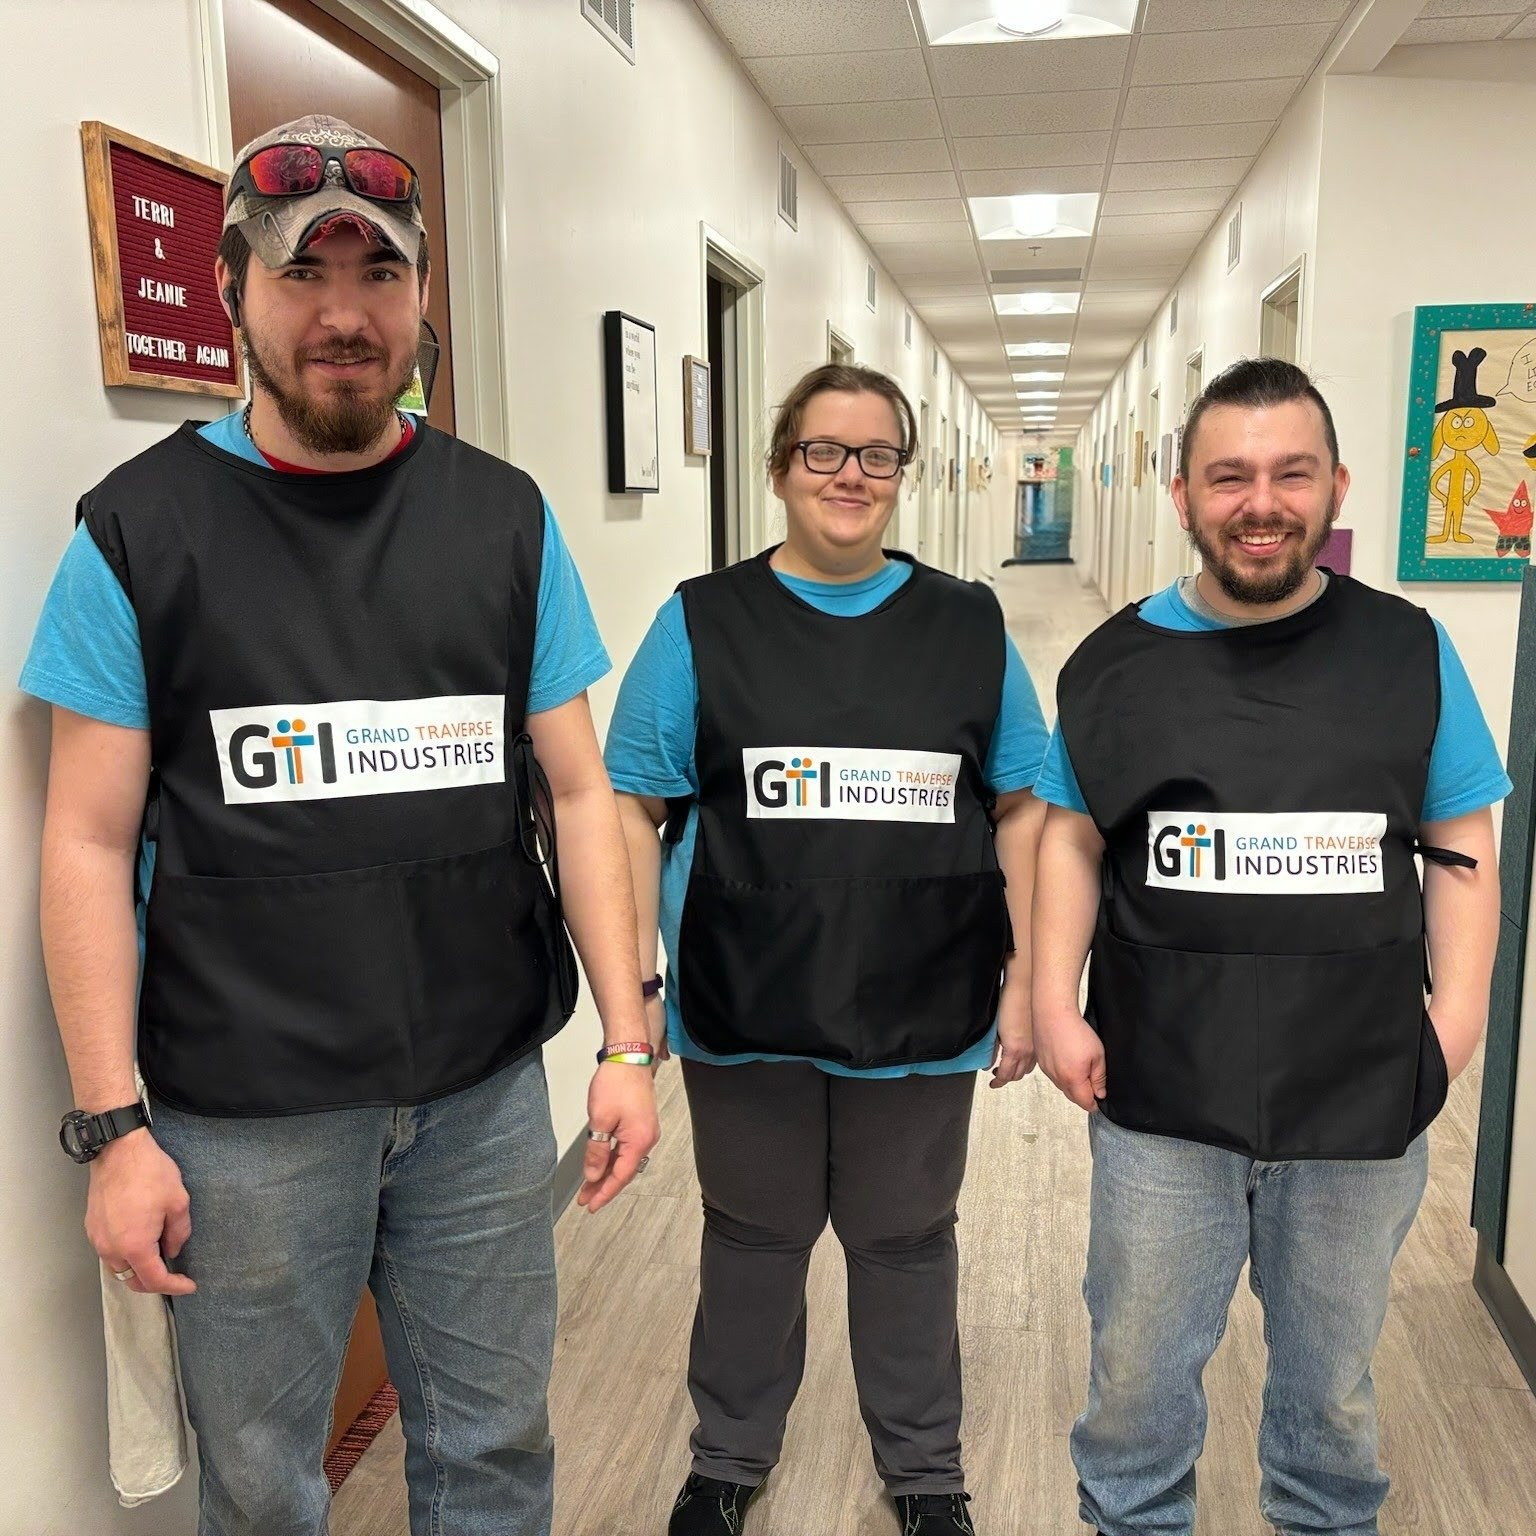 Our Janitorial crew is testing out some new work smocks. What you do you think?